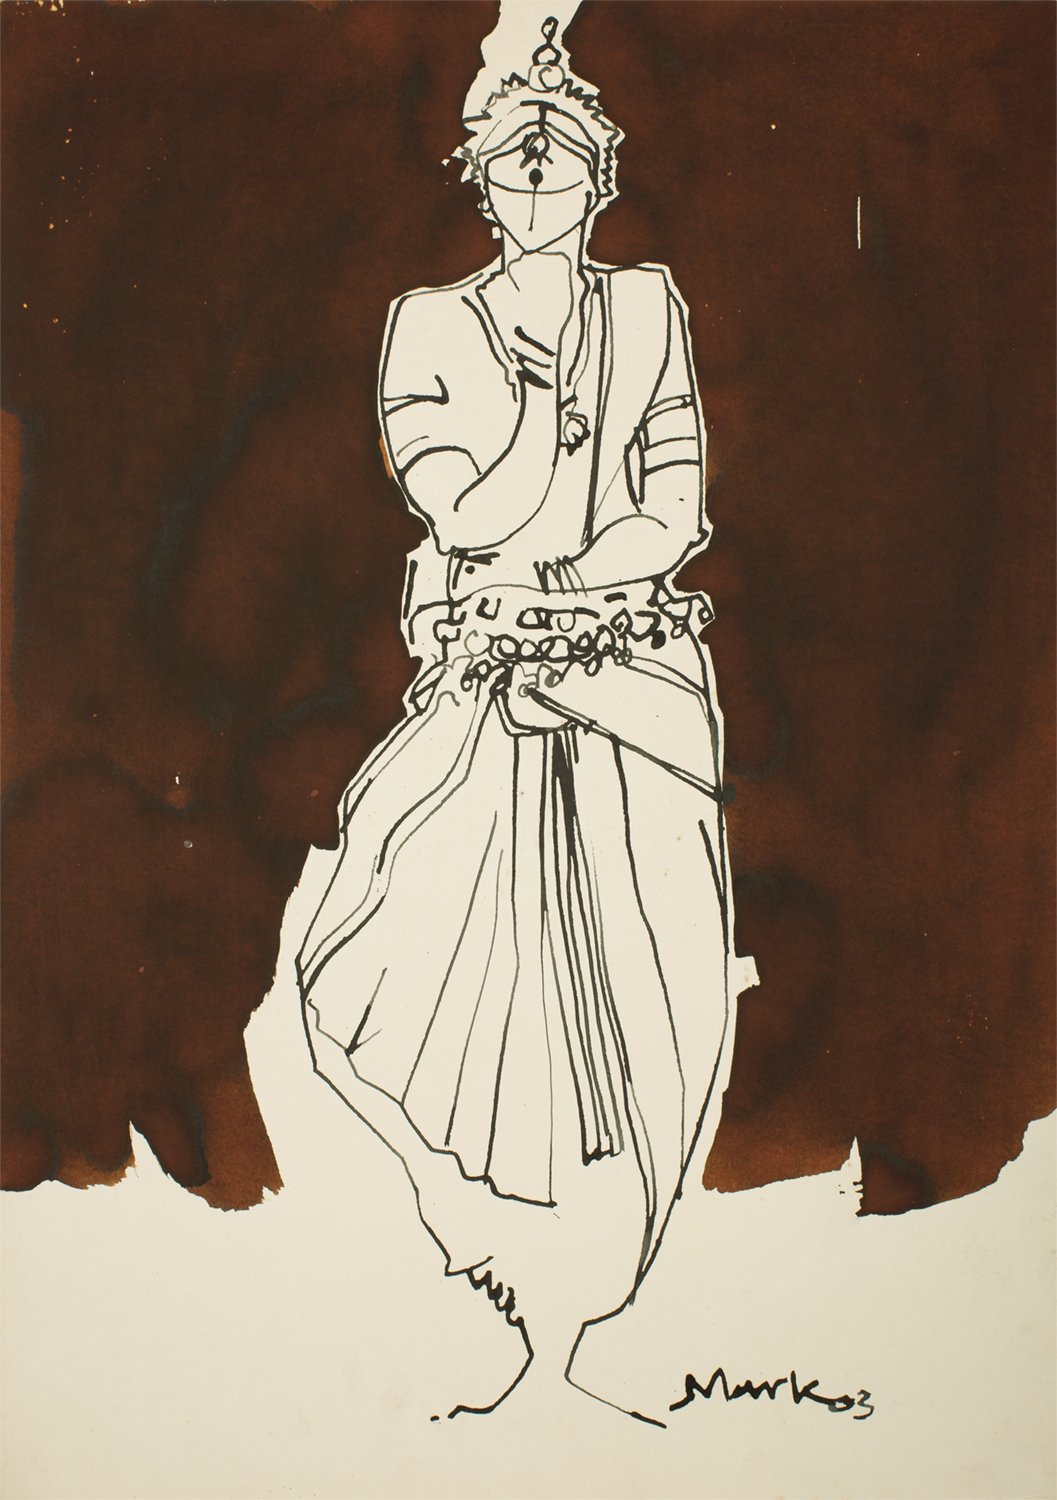 Performer 324|S. Mark Rathinaraj- Pen and Ink on Paper, , 21 x 15 inches